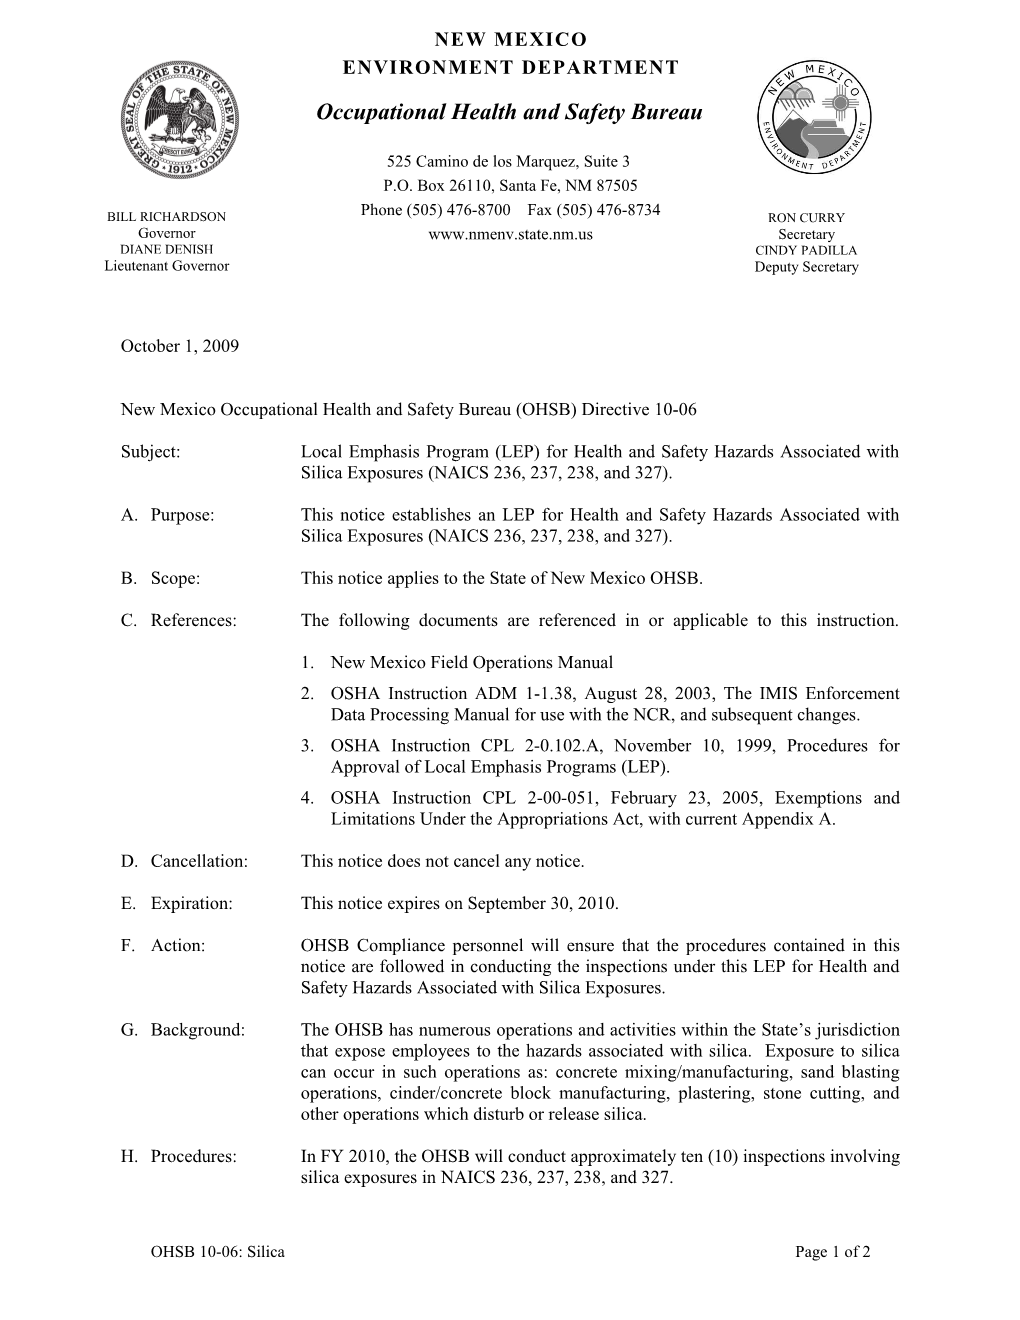 New Mexico Occupational Health and Safety Bureau (OHSB) Directive 10-06